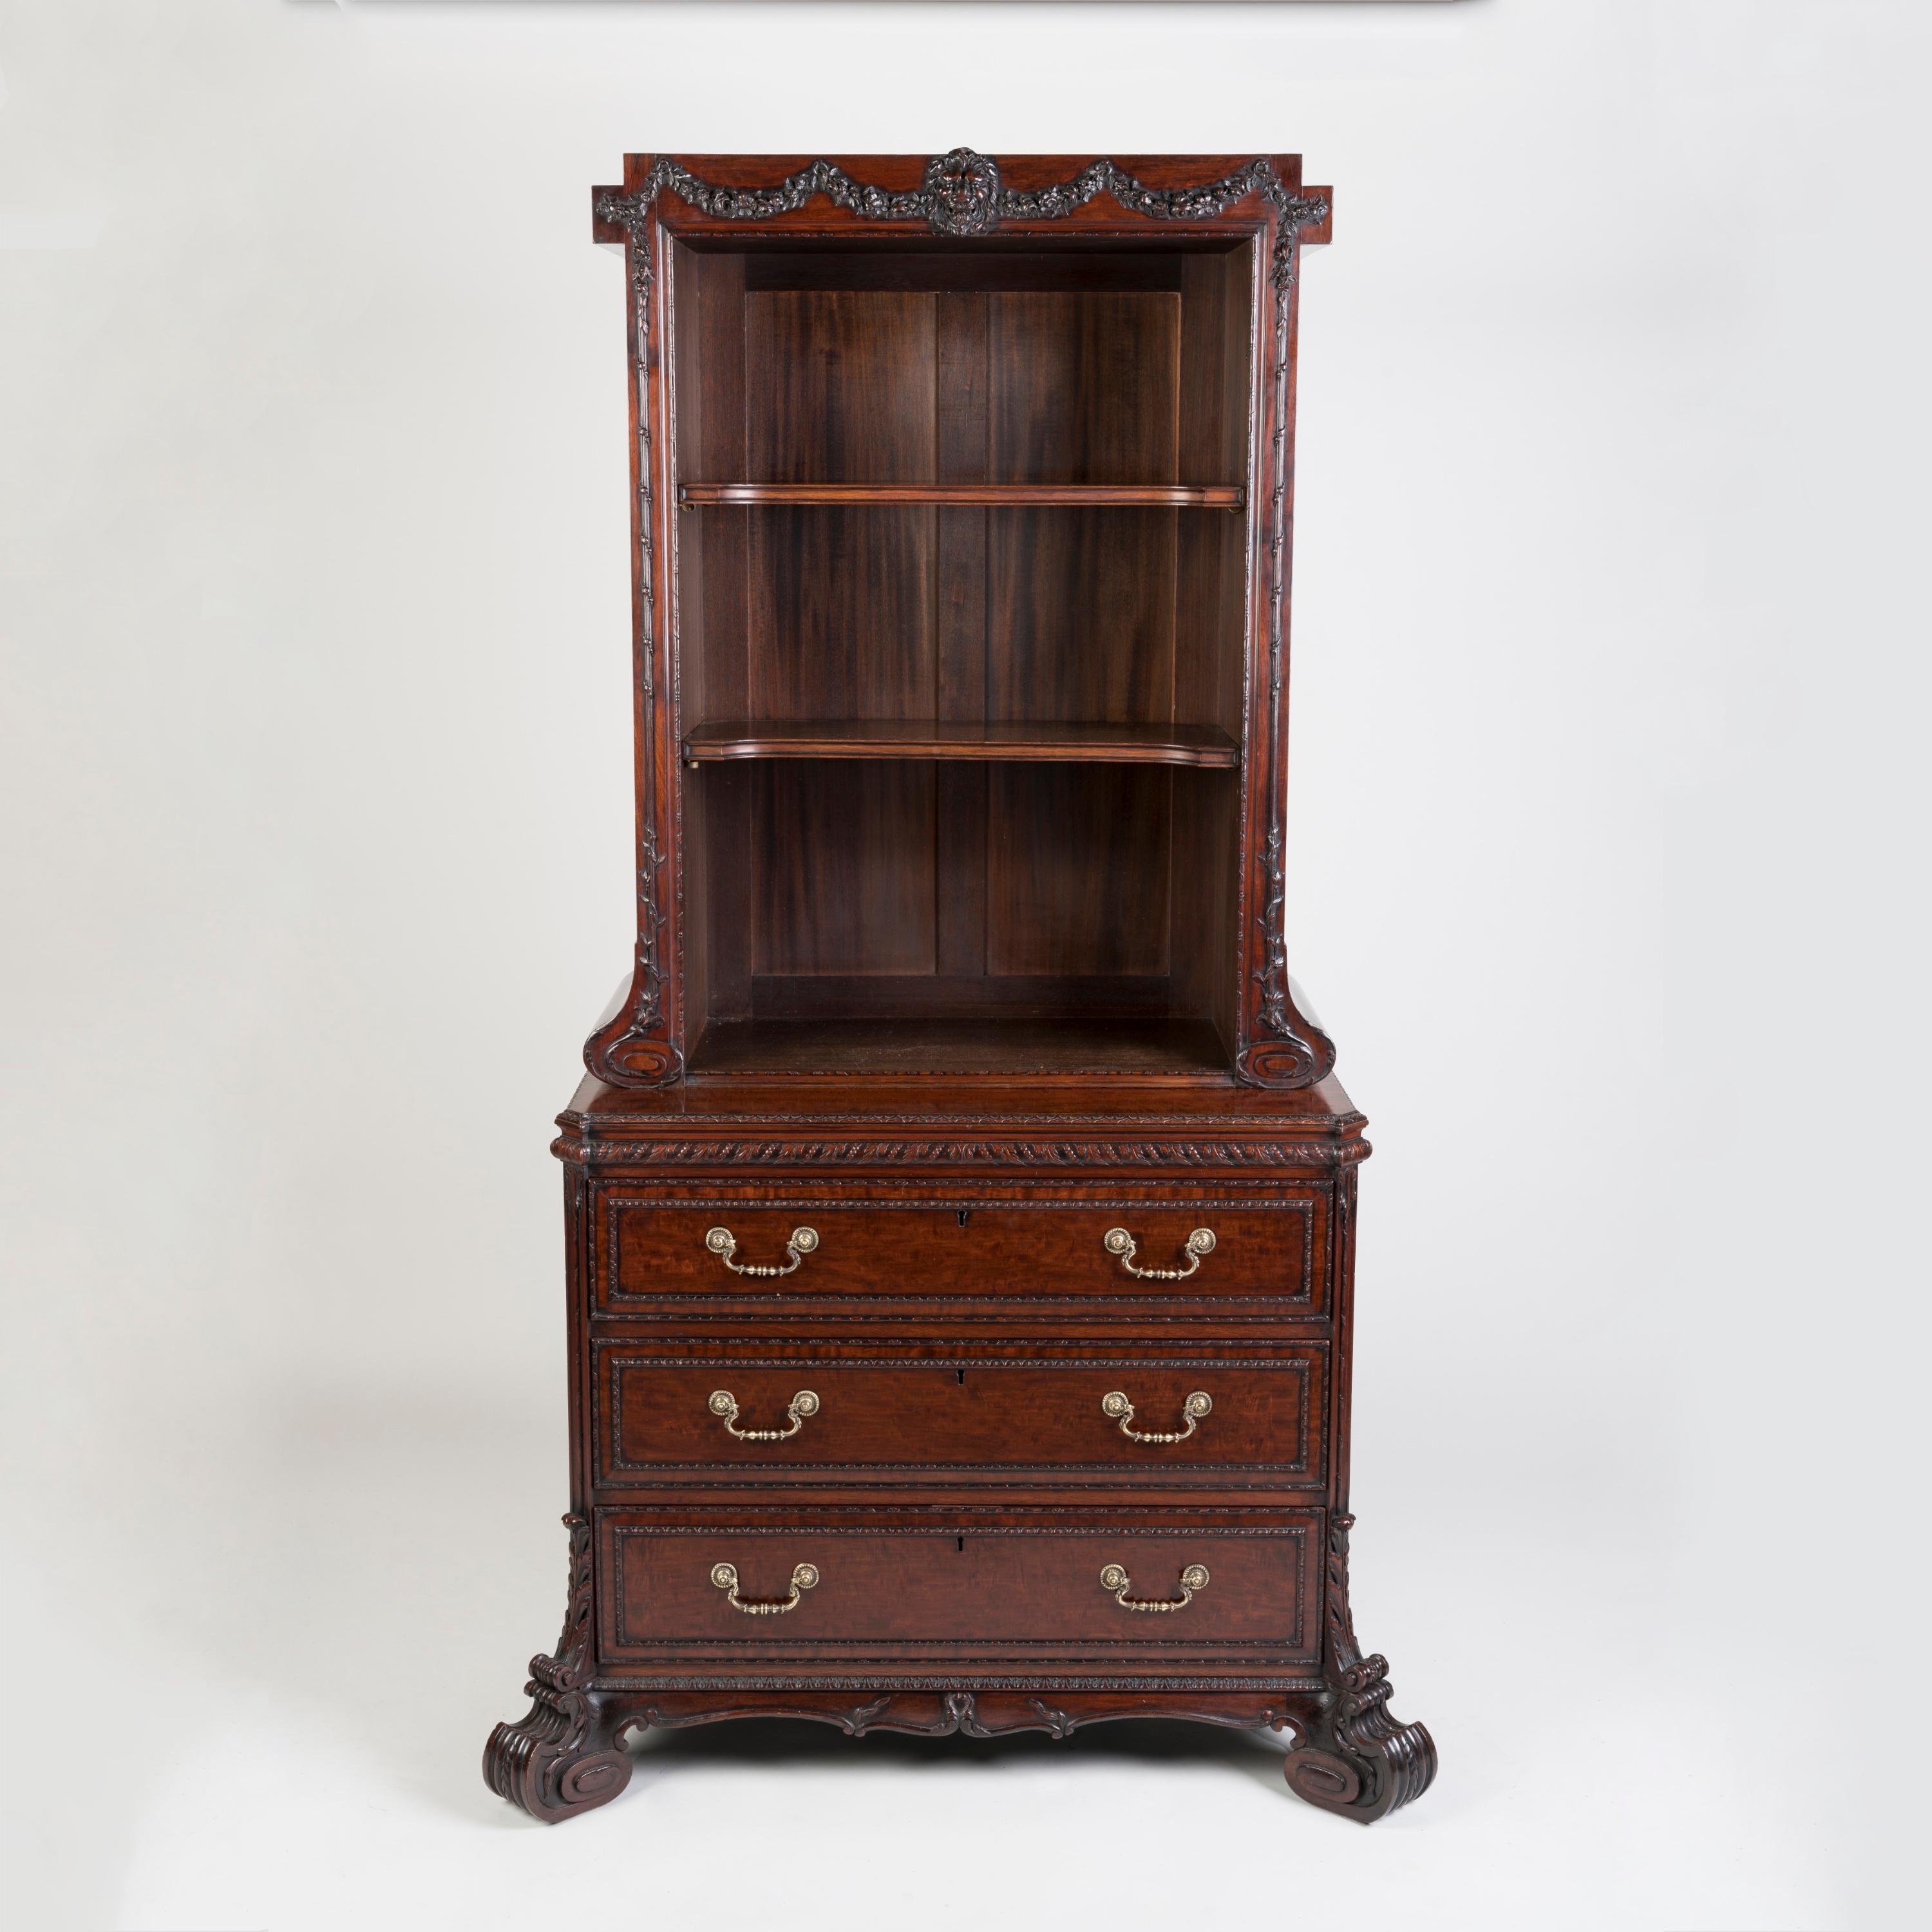 19th Century Carved Mahogany Cabinet Bookcase by H. Samuel in the Georgian Style For Sale 2